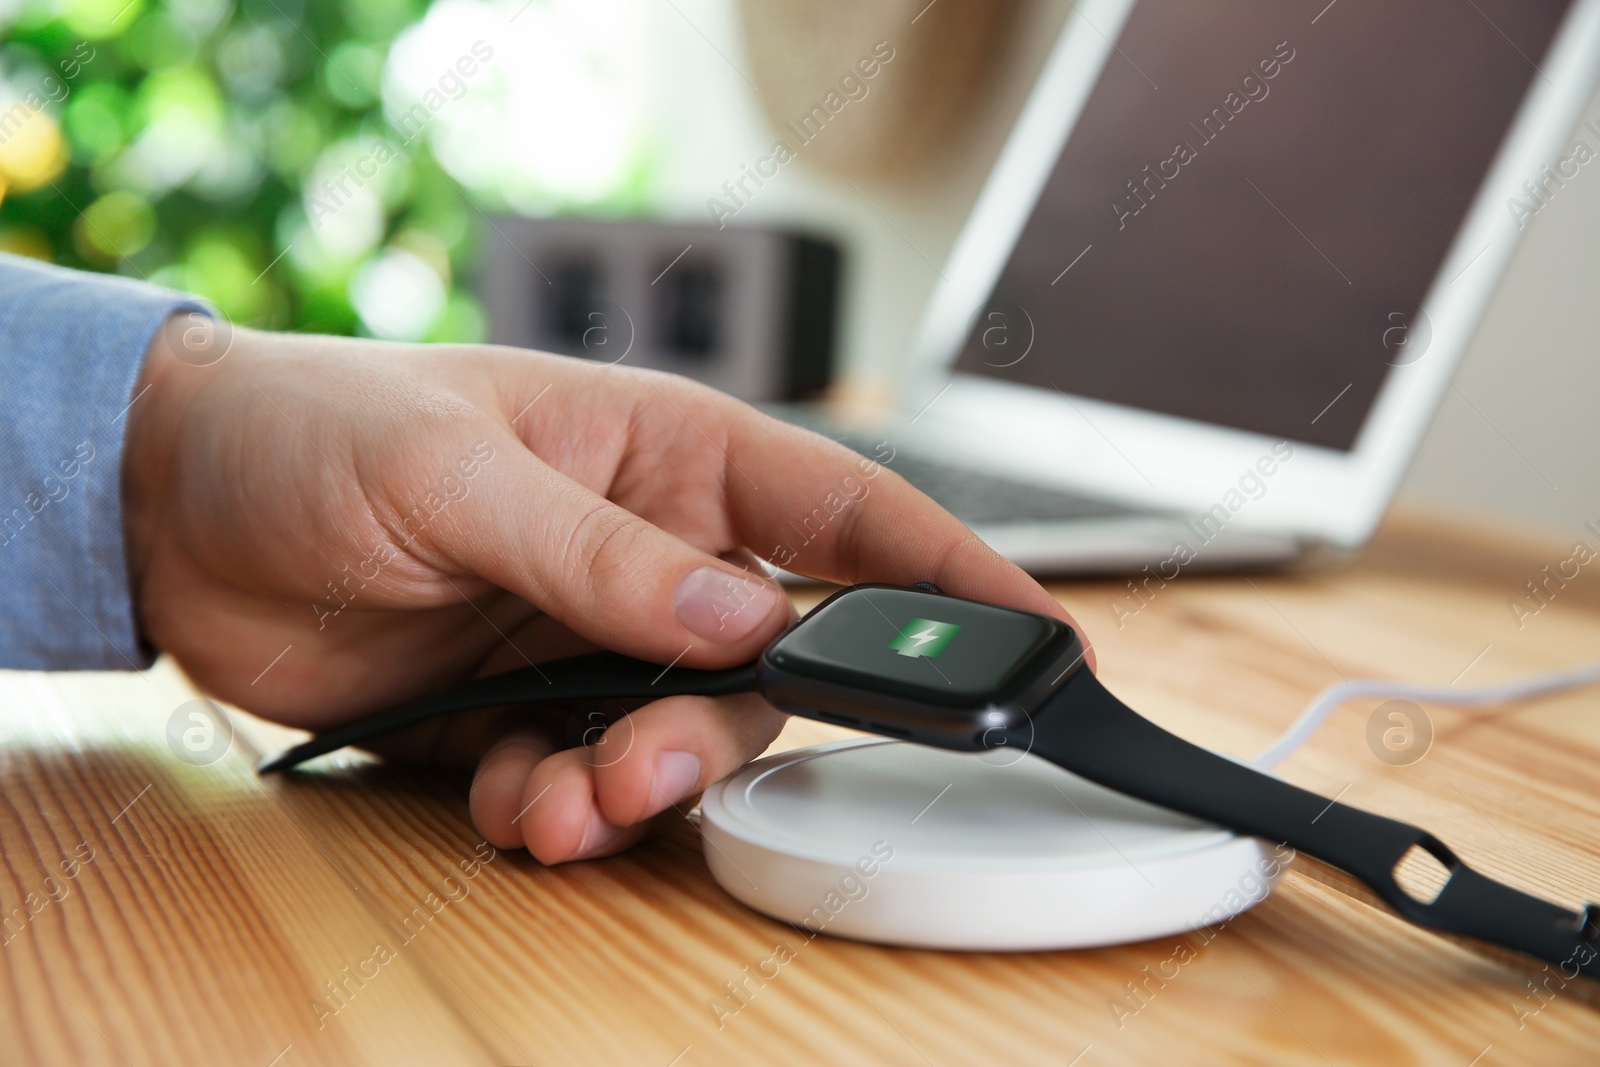 Photo of Man putting smartwatch onto wireless charger at wooden table, closeup. Modern workplace accessory